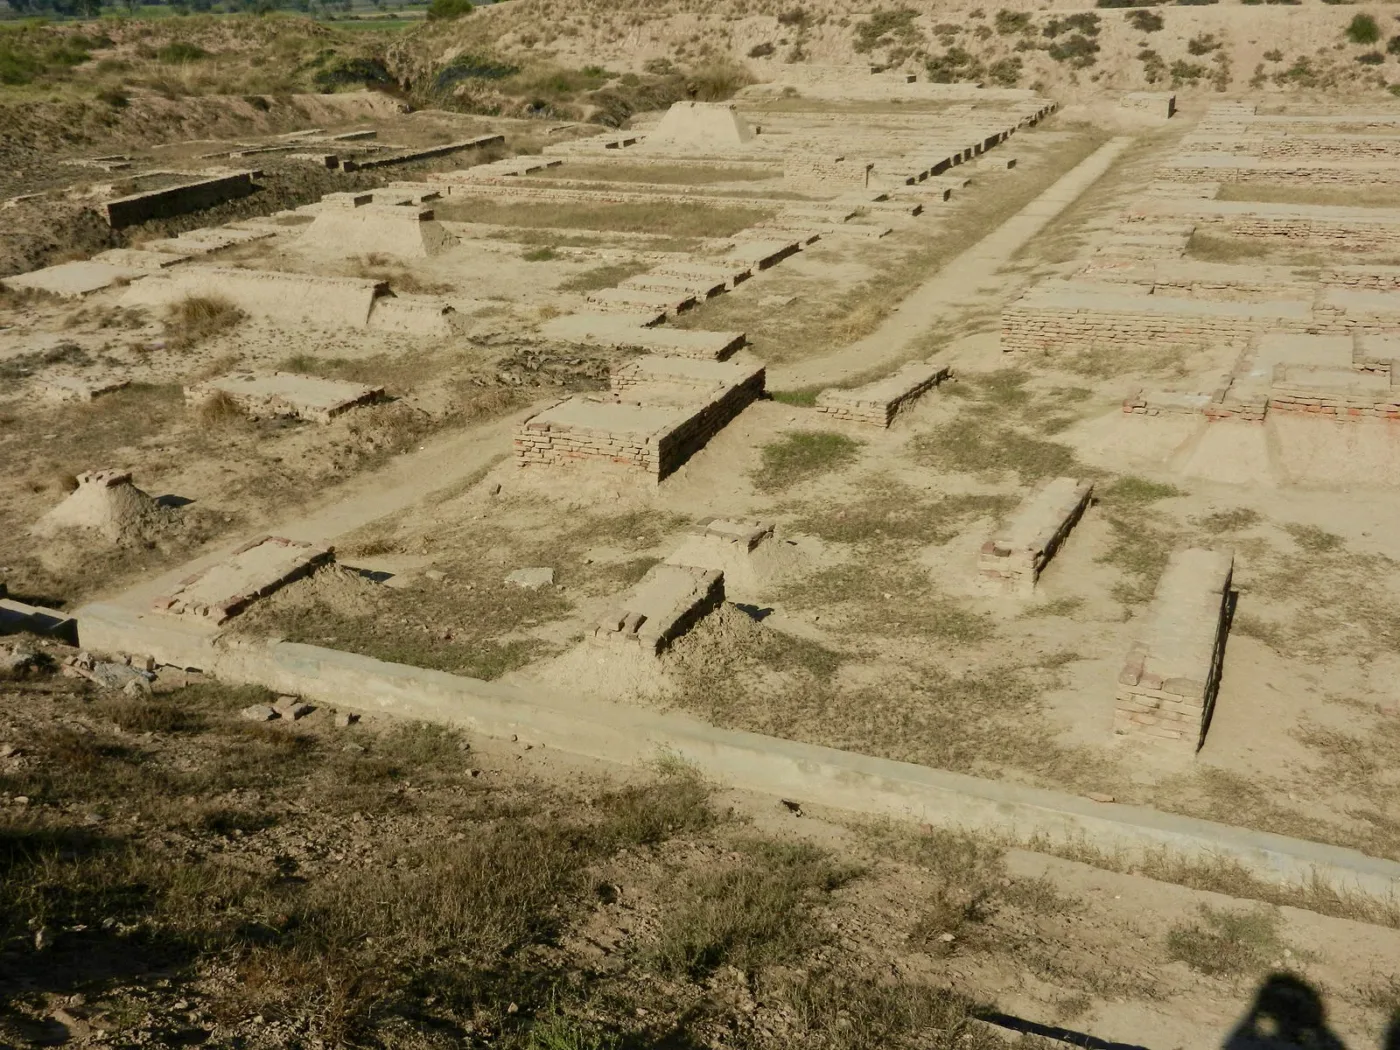 View of Granary and Great Hall on Mound F in Harappa